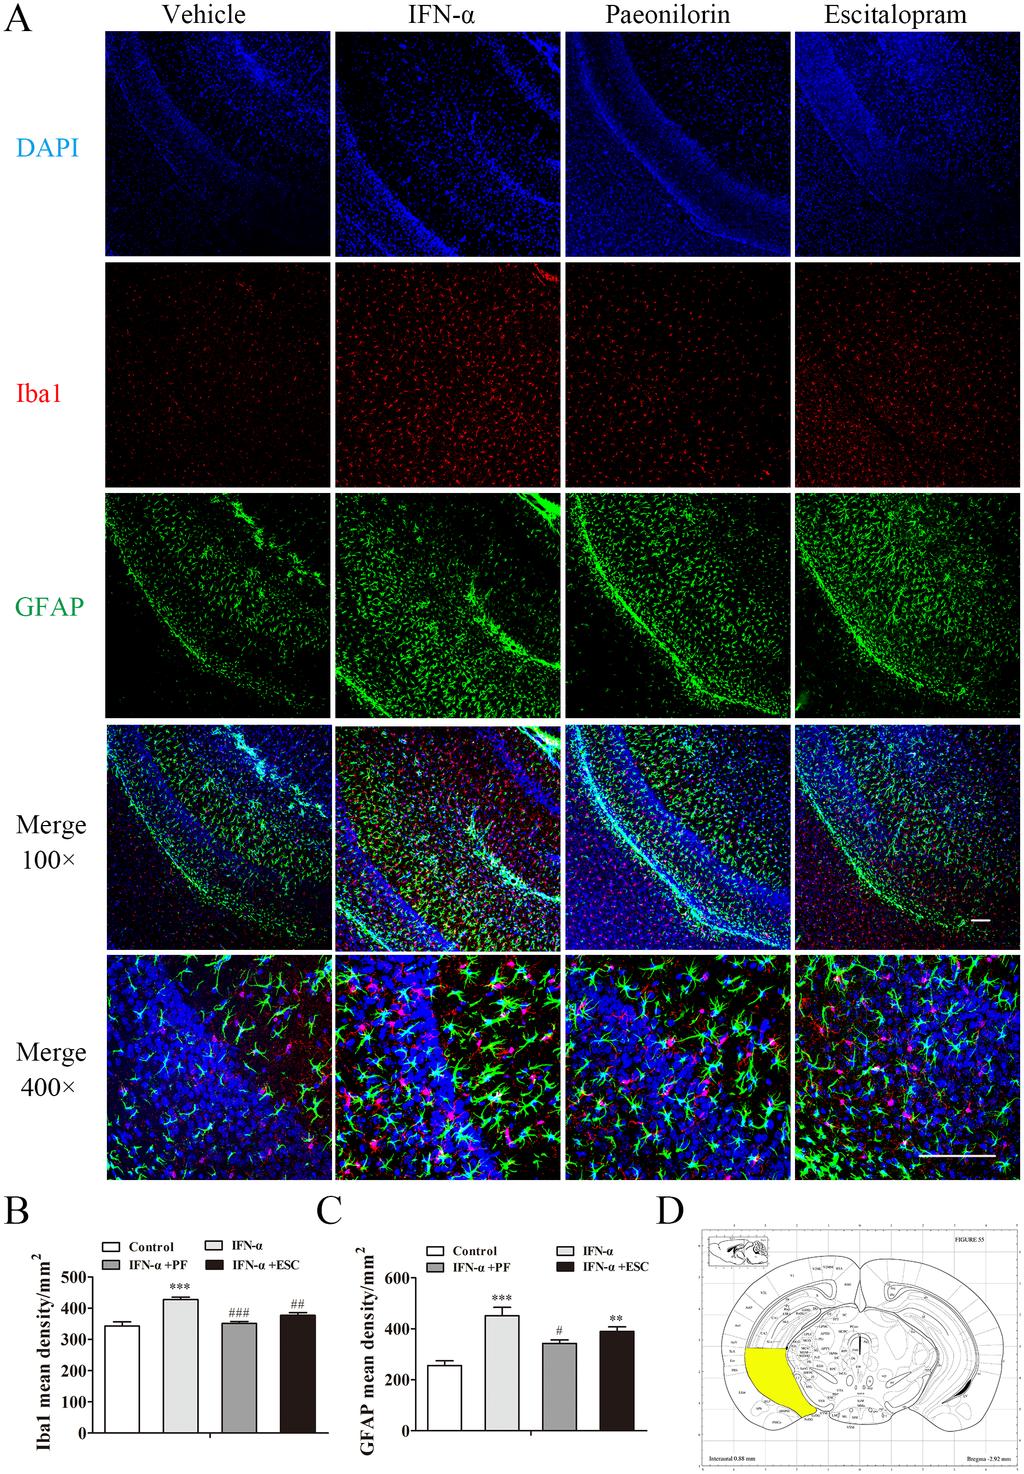 Figure 8: Paeoniflorin reduced interferon (IFN)-α-induced neuroinflammation in the ventral hippocampus.